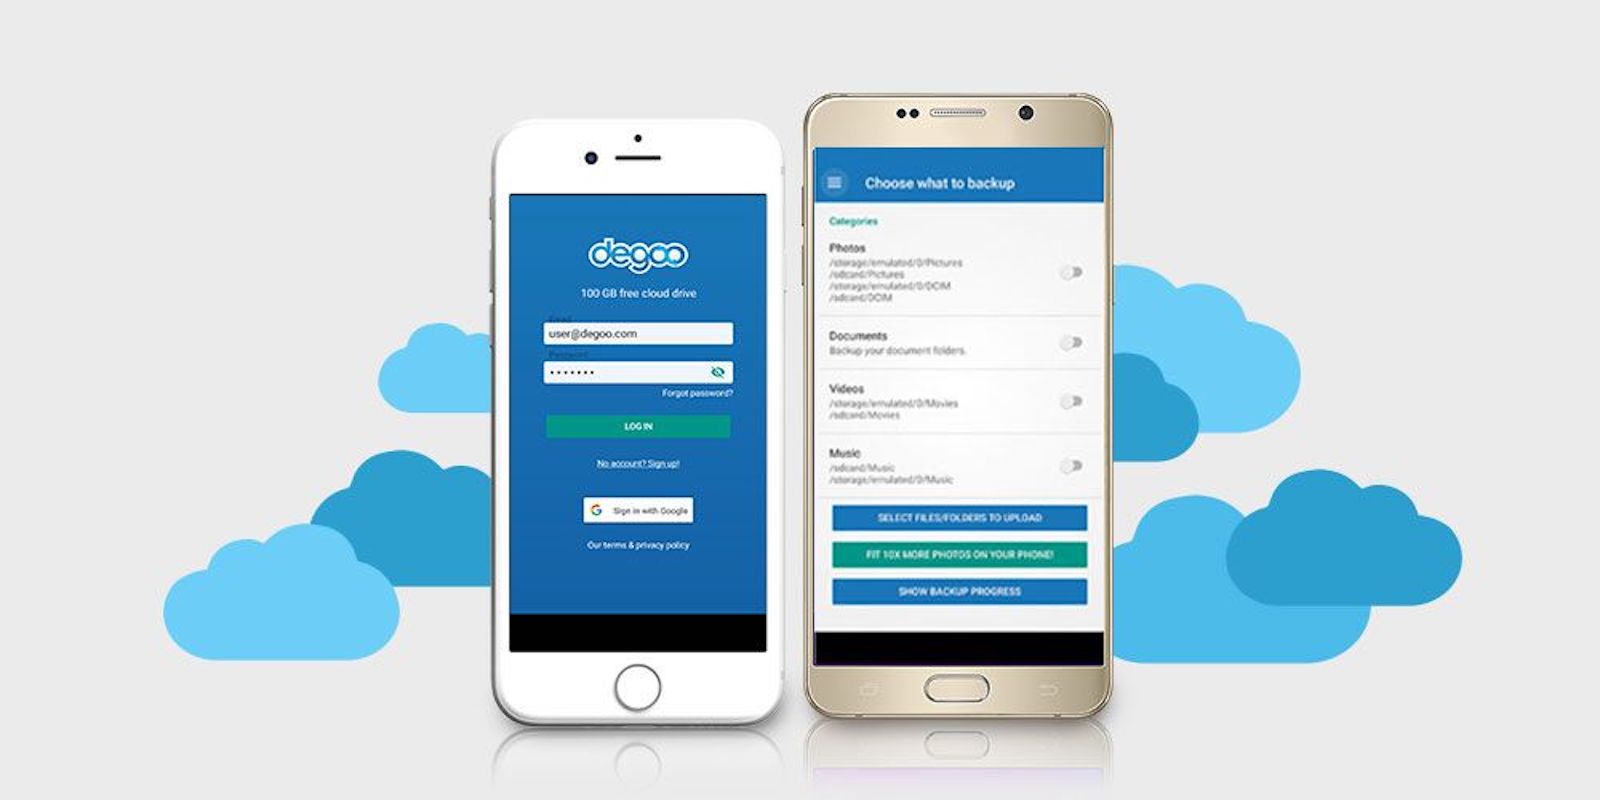 Score truly a massive amount of cloud storage at a truly massive discount.